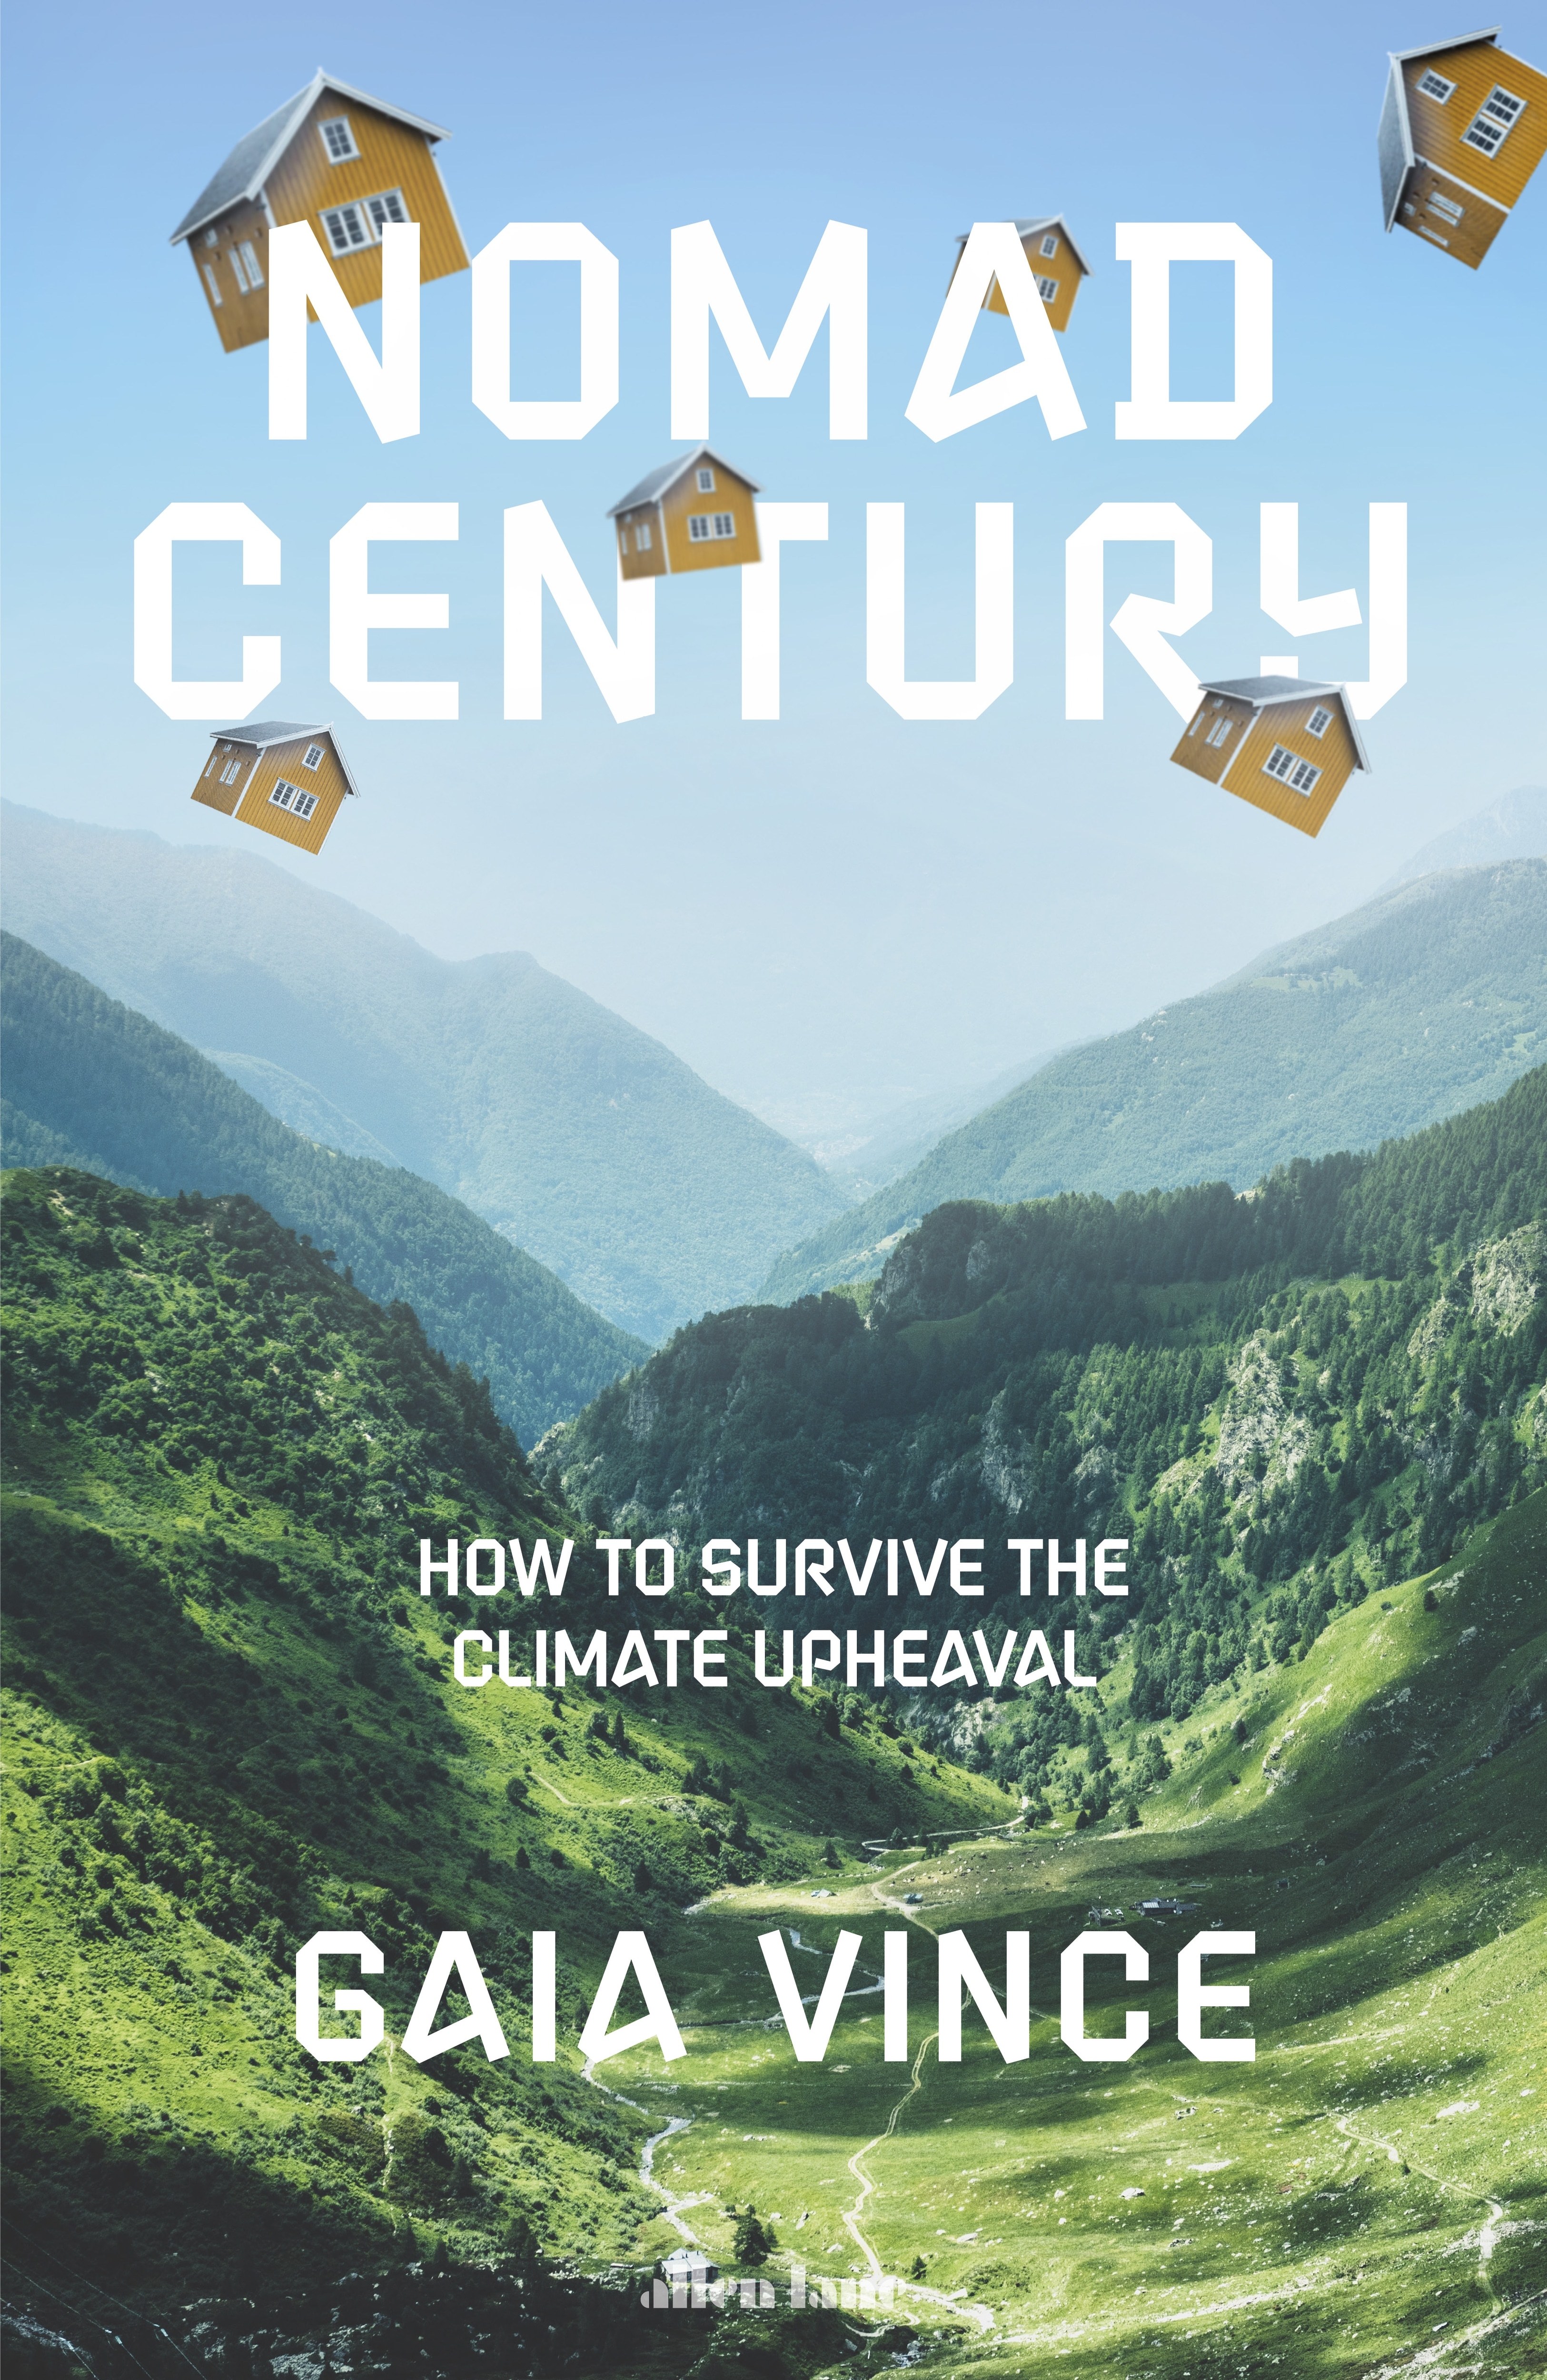 Book “Nomad Century” by Gaia Vince — August 25, 2022